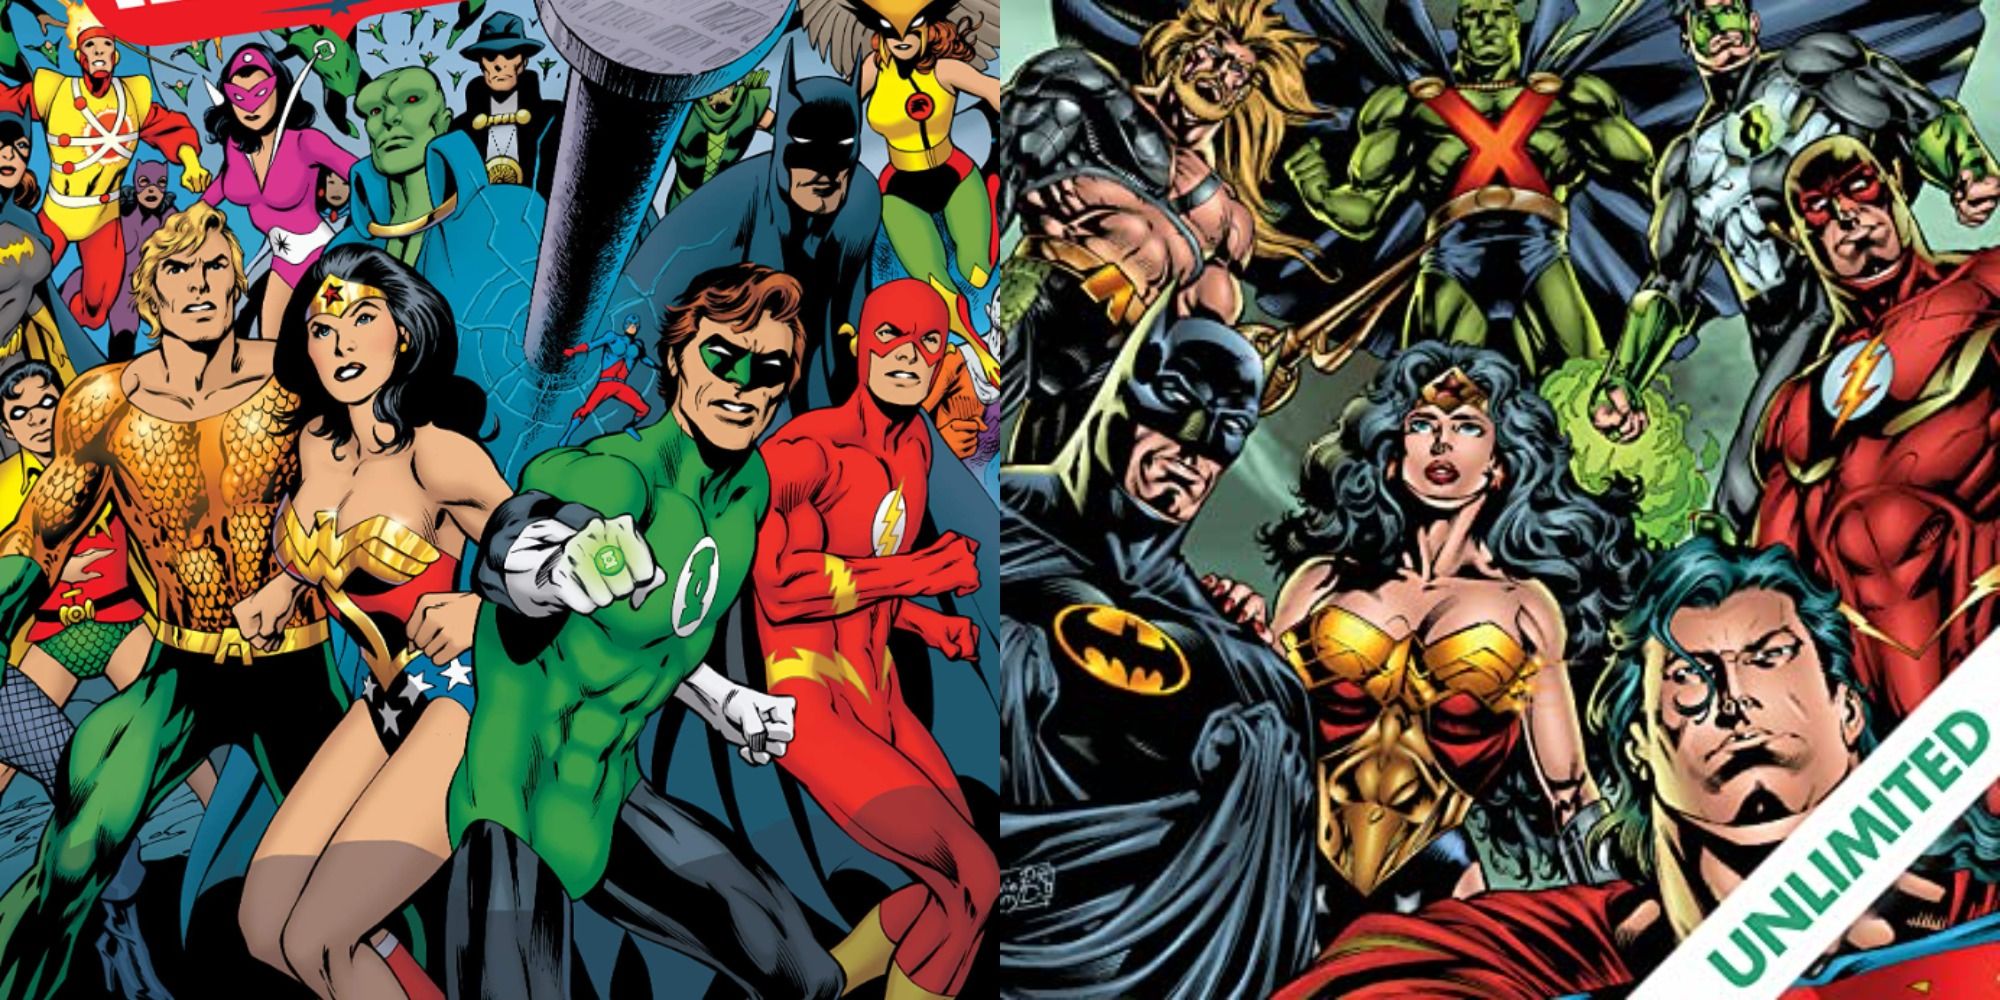 Split image showing the cover for Justice League America; The Nail, and Justice League #1